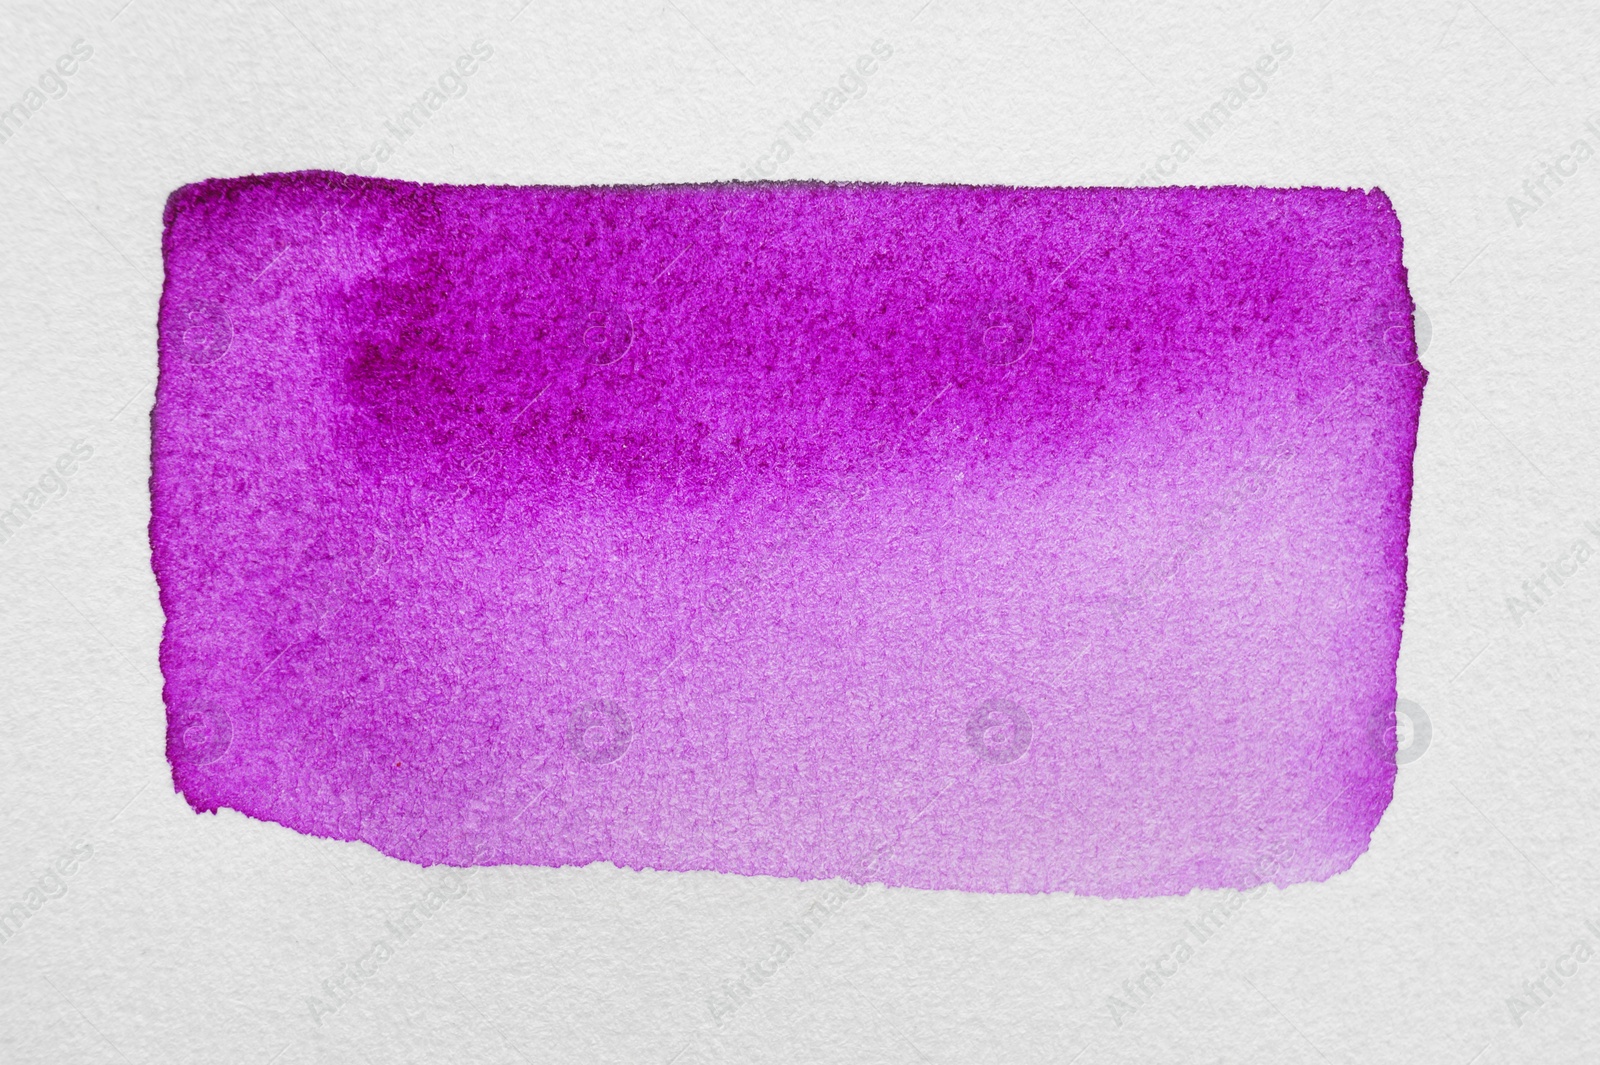 Photo of Rectangle drawn with purple watercolor paint on white background, top view